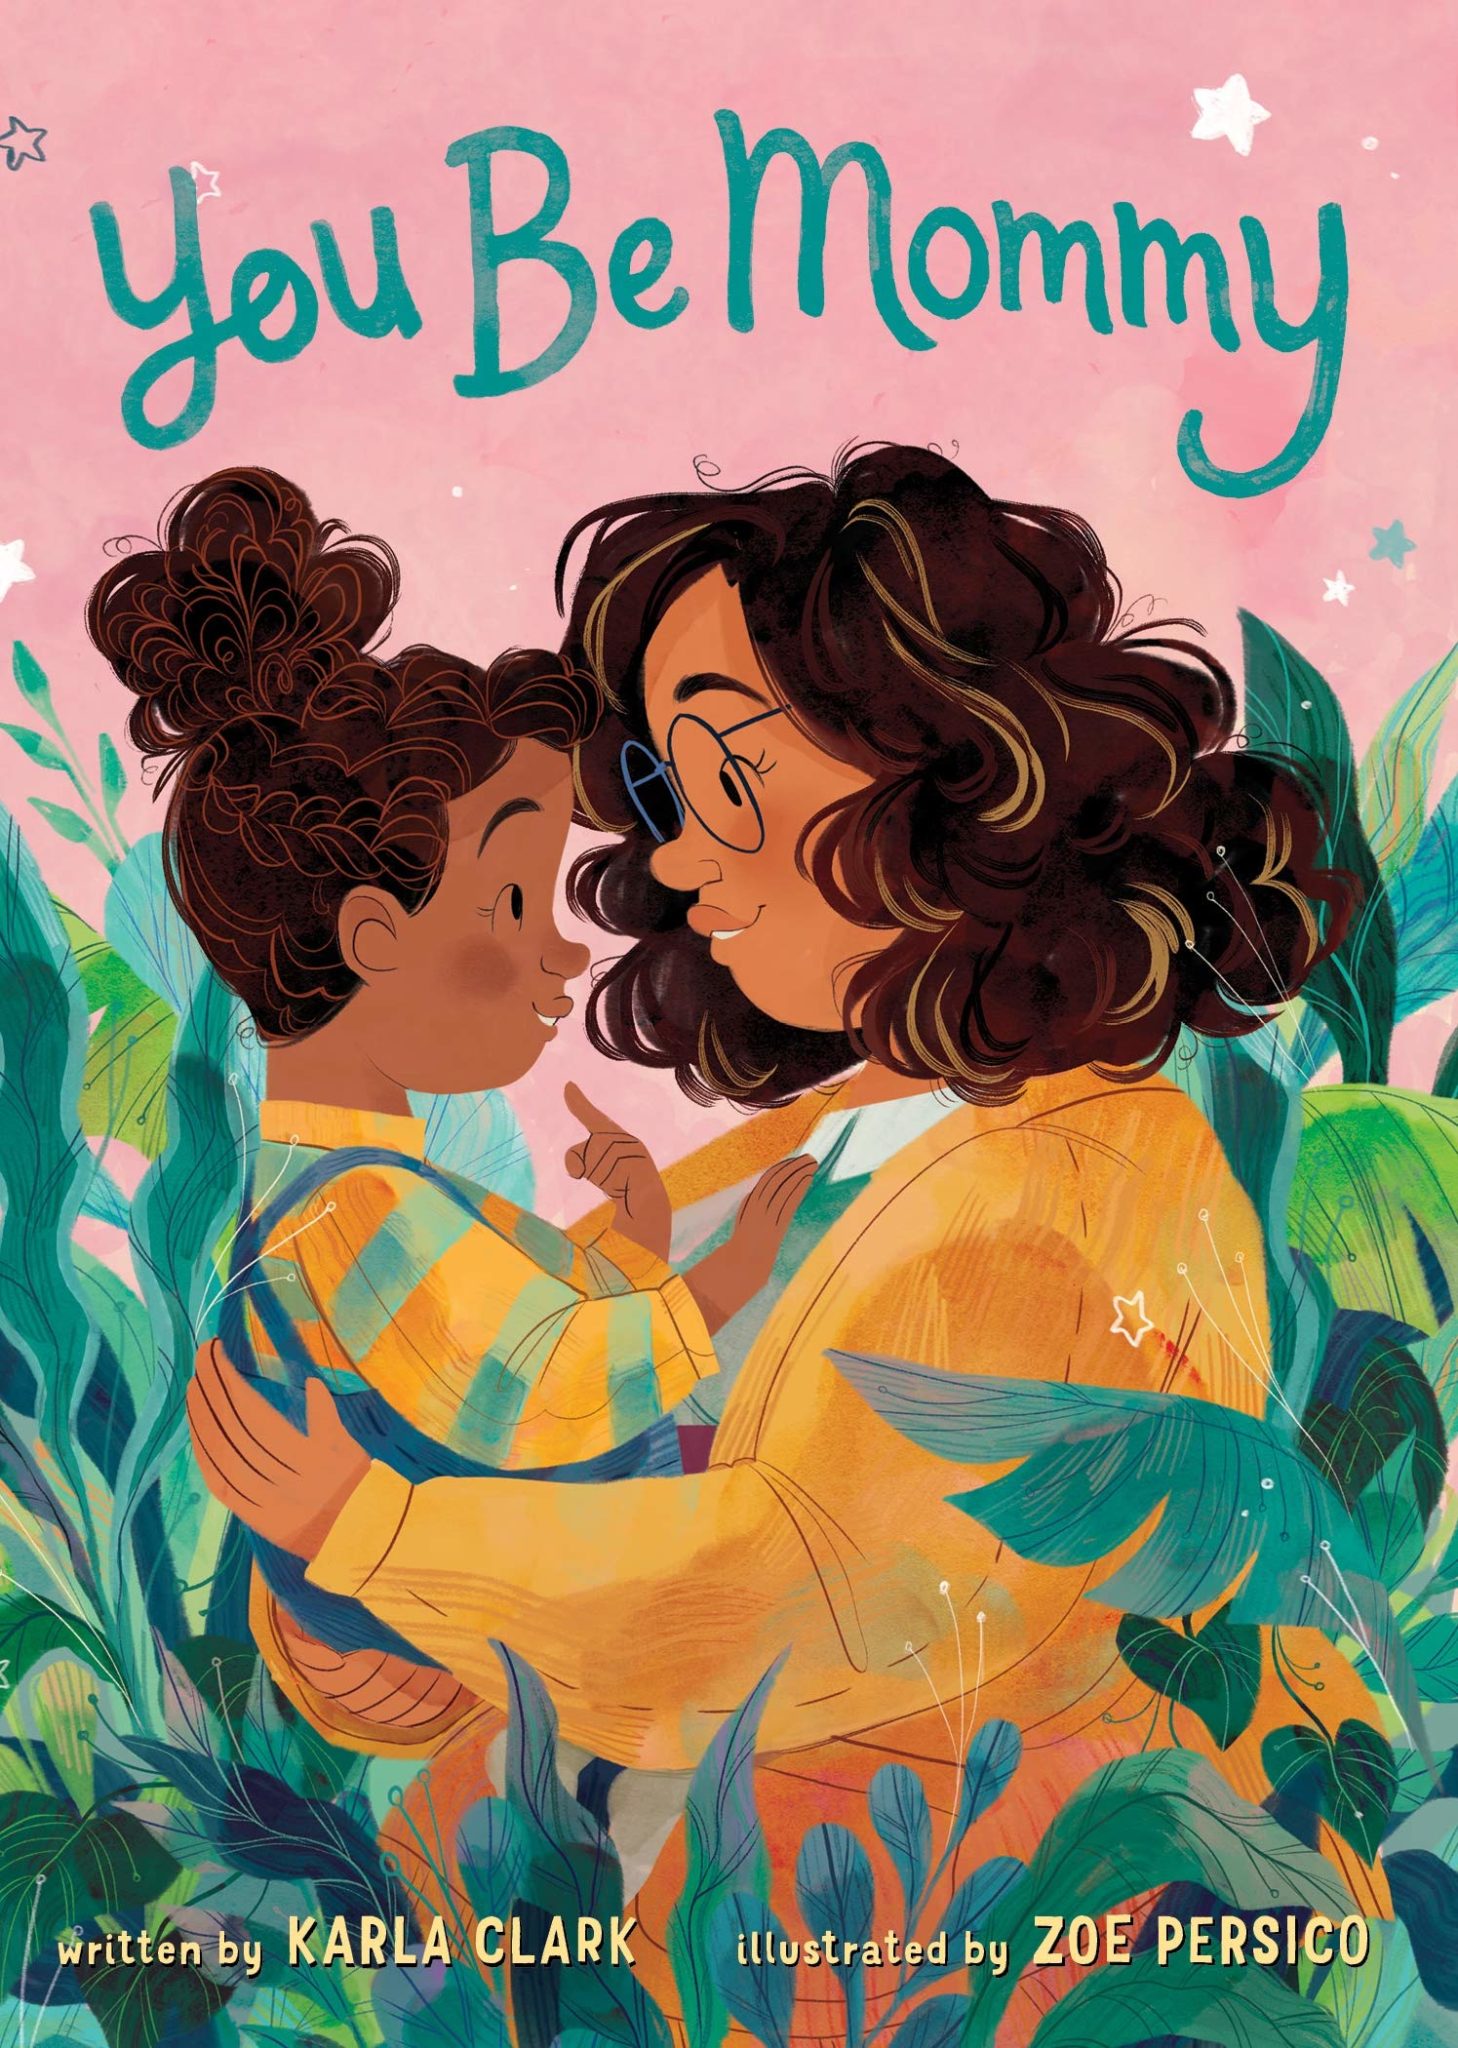 The cover of the picture book "You Be Mommy" features a mother holding her young daughter as they look into each other's eyes. They are surrounded by plants and leaves.